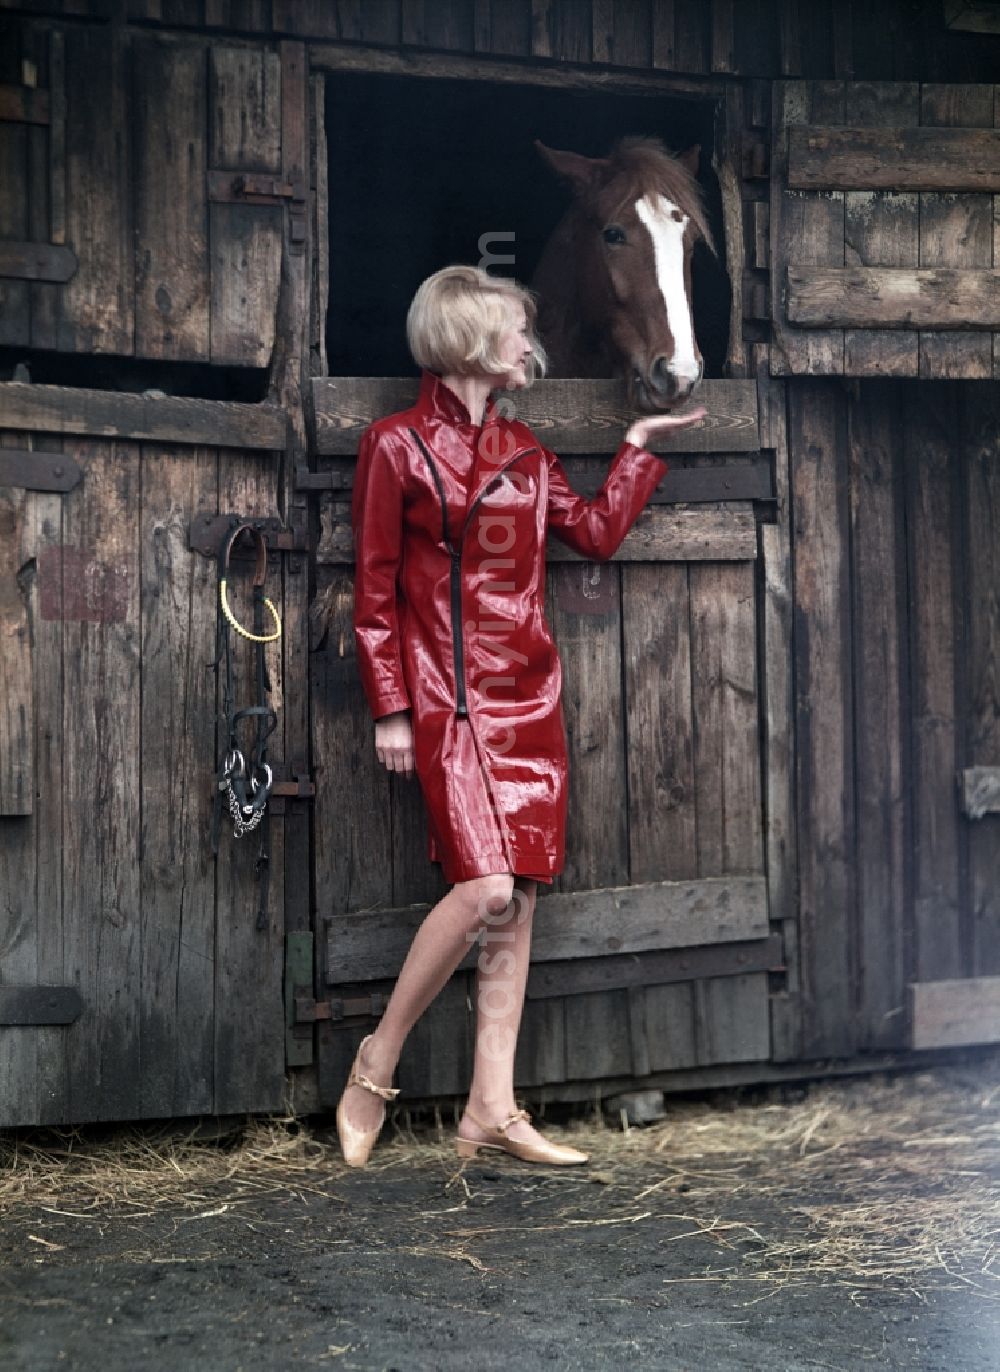 GDR picture archive: Berlin - Model shows the latest women's fashion in front of a horse stall in Berlin, the former capital of the GDR, German Democratic Republic